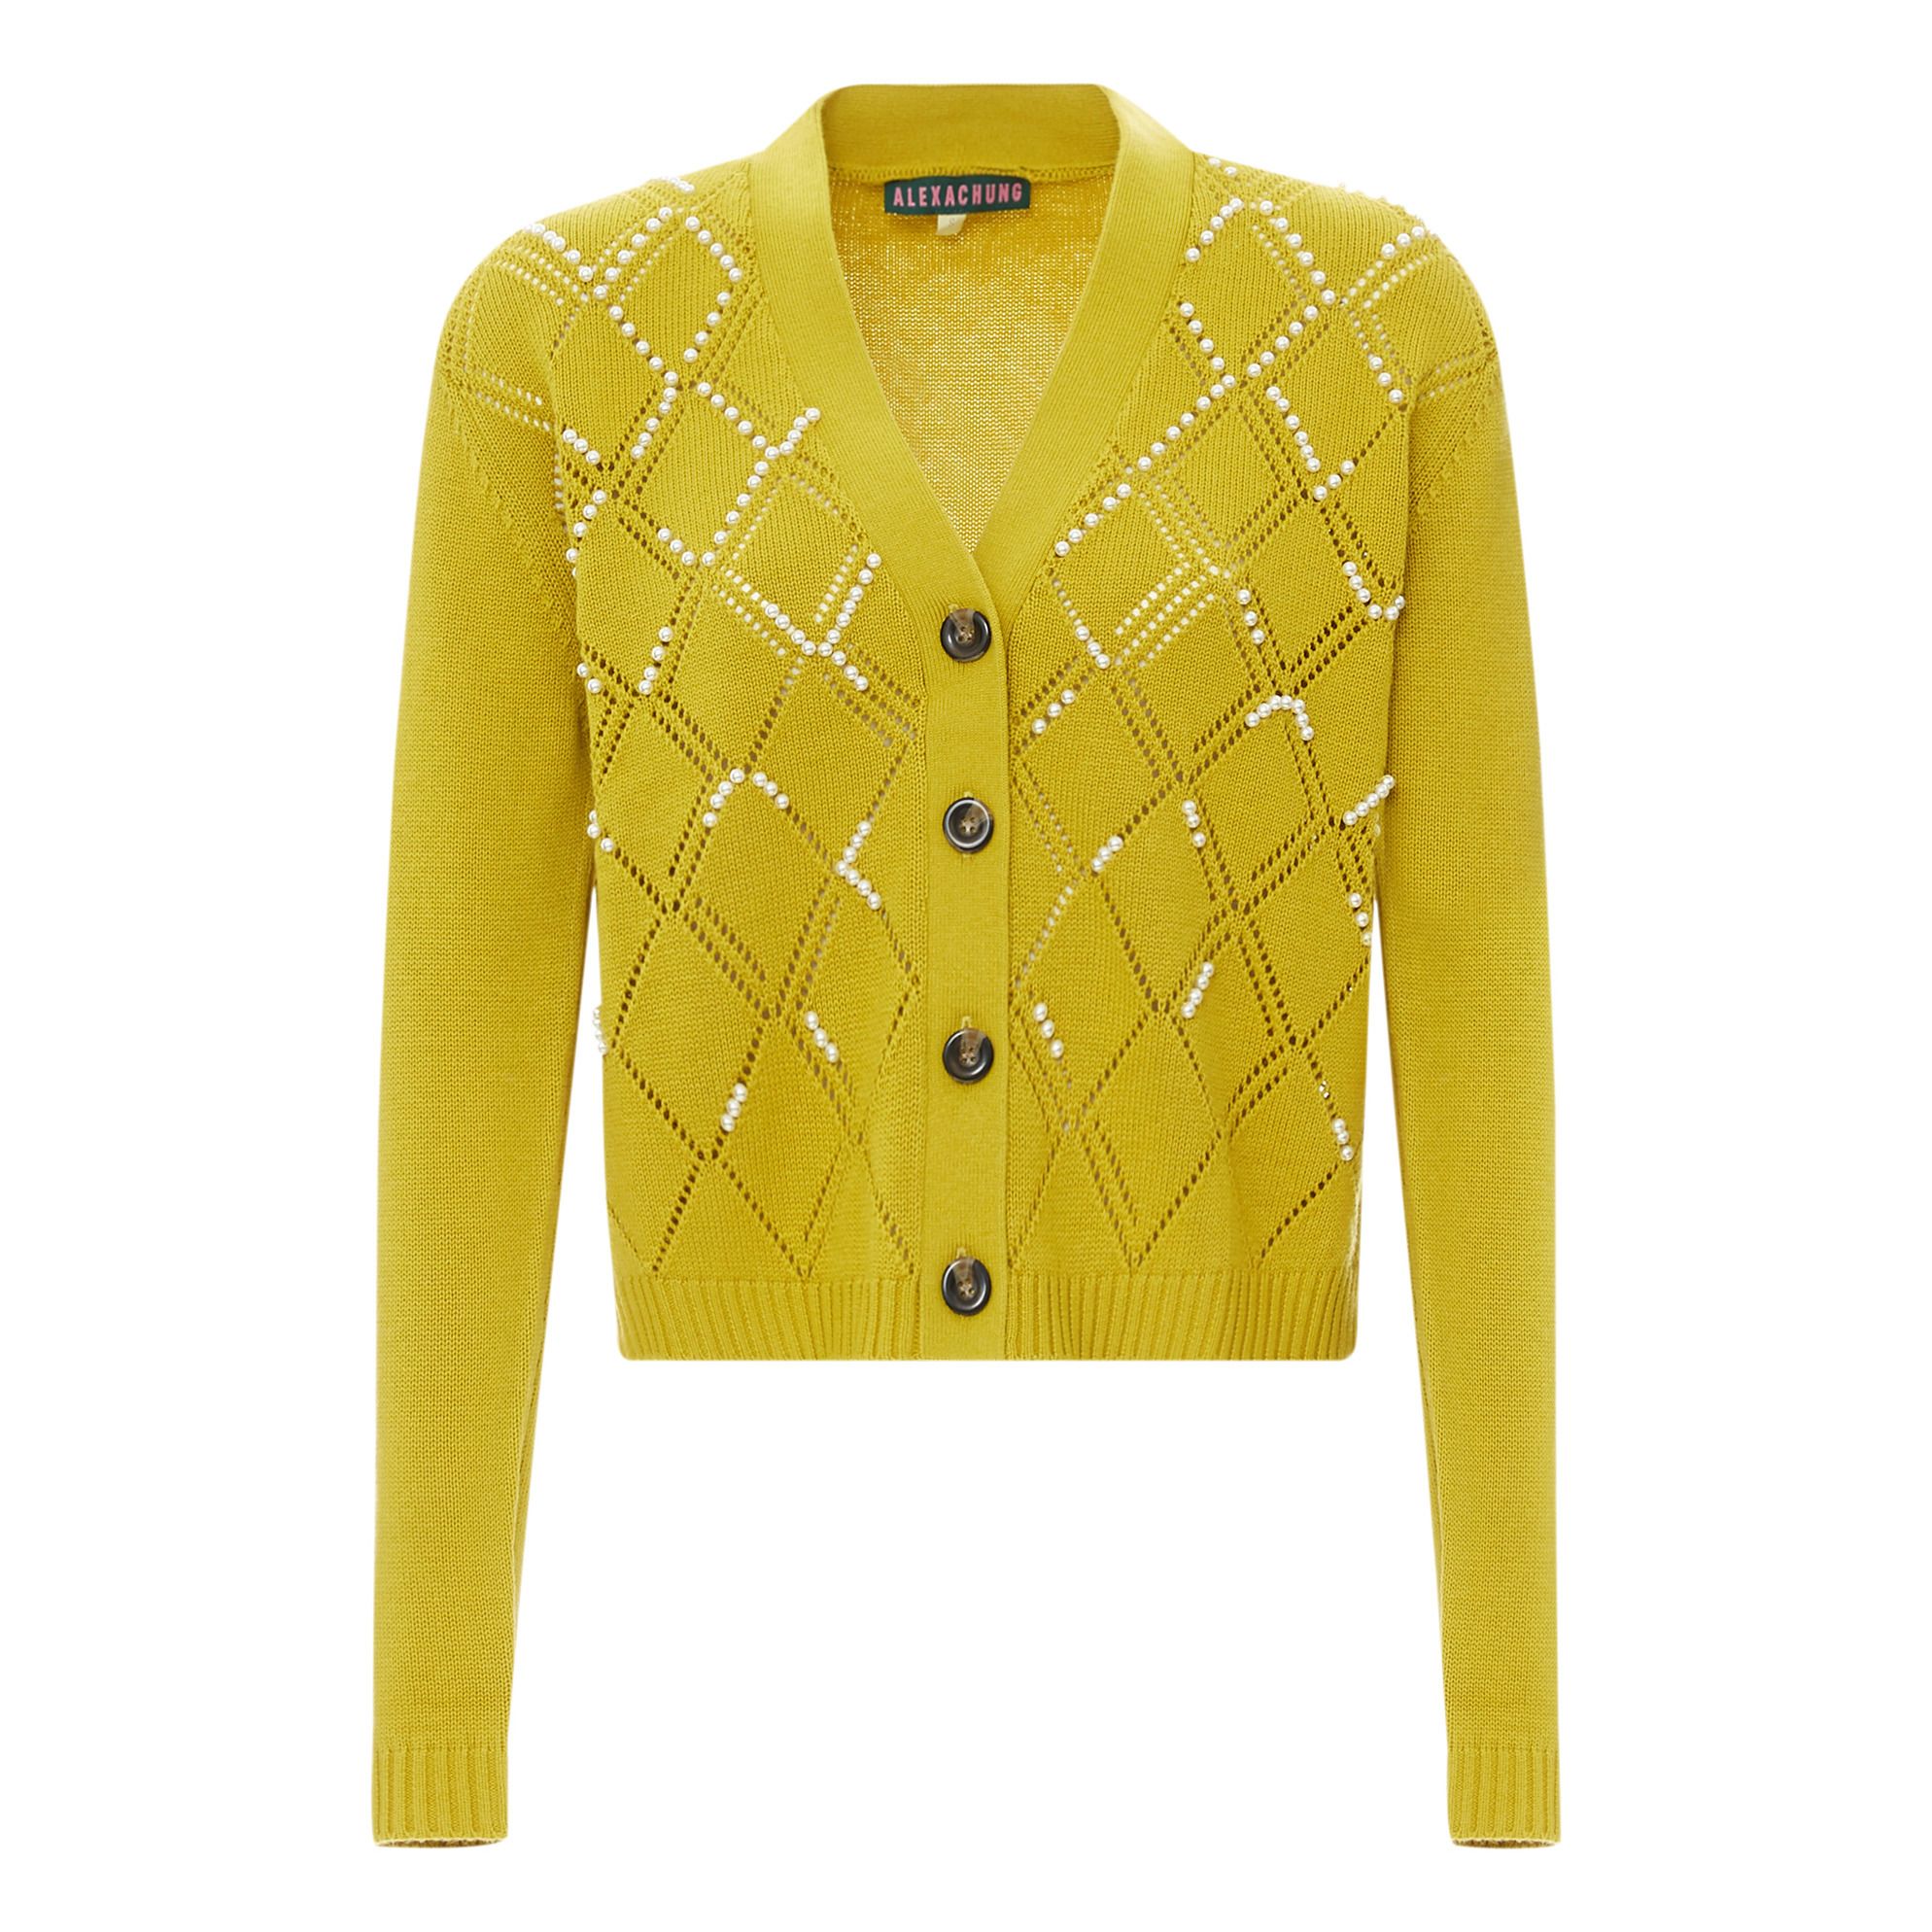 Cardigan with Embroidered Pearls Yellow Alexa Chung Fashion Adult